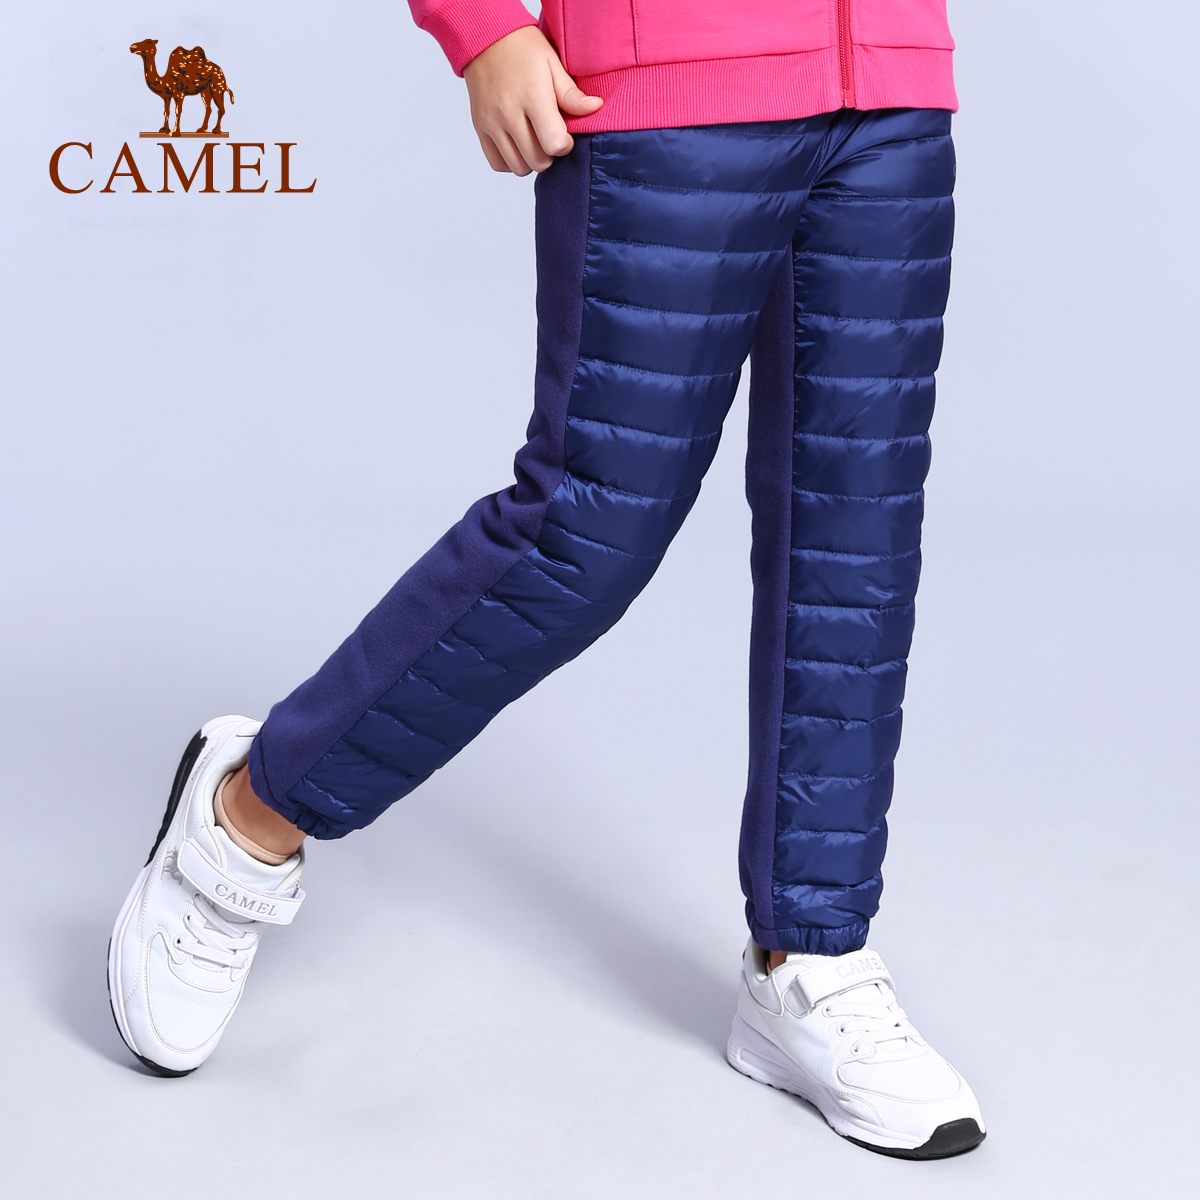 Camel outdoor children's clothes Autumn and Winter new style children's down trousers for boys and girls